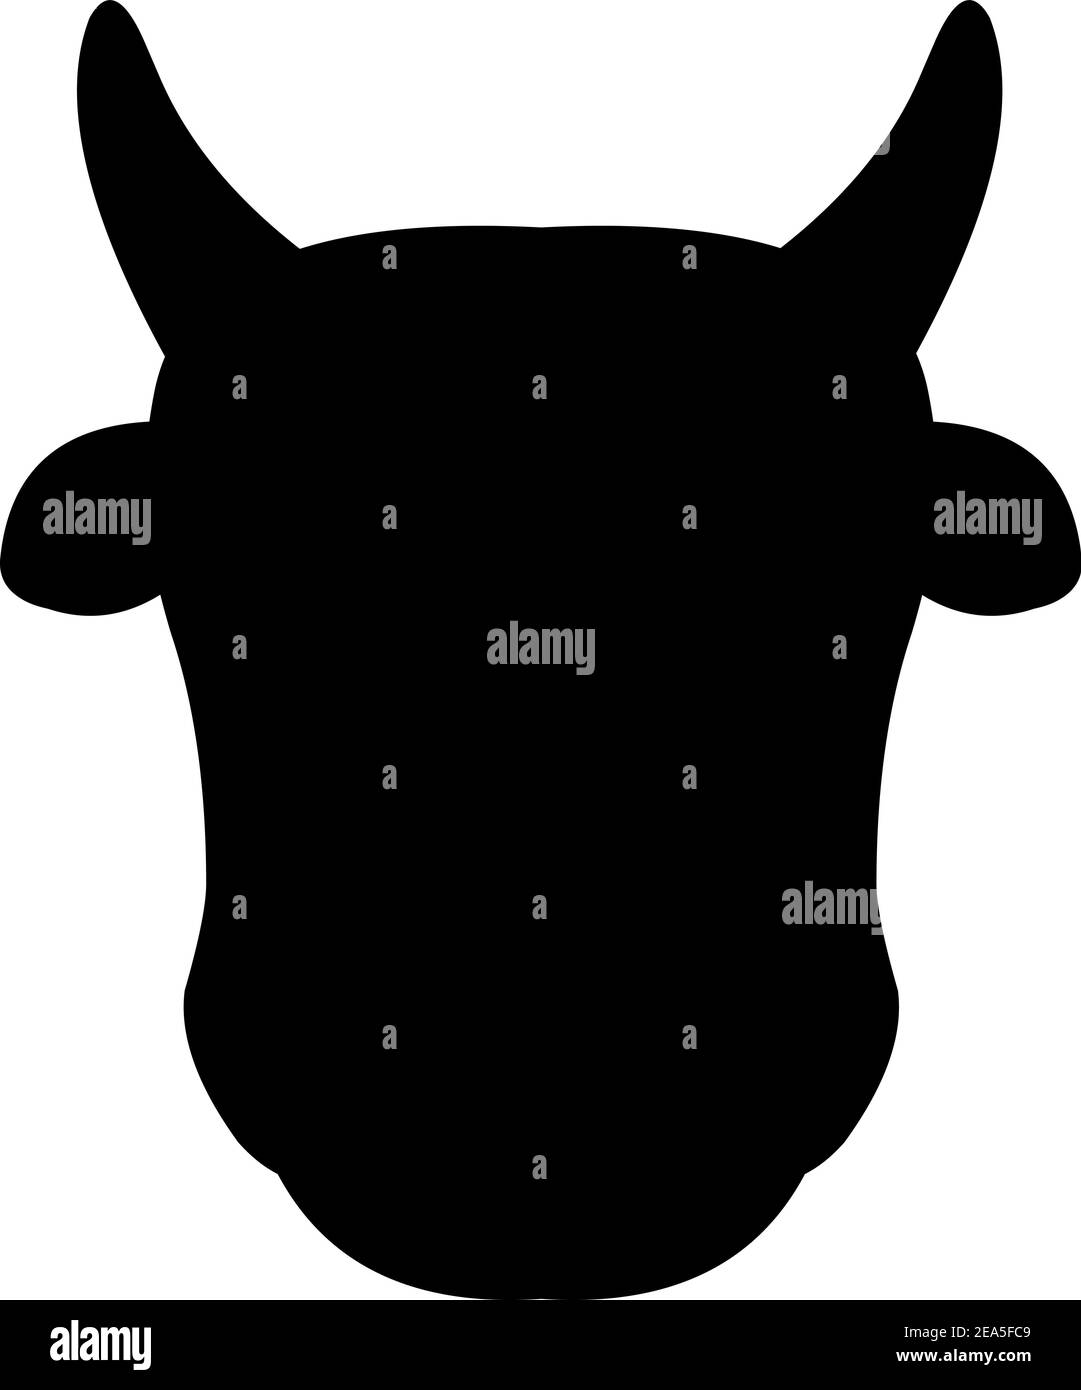 Vector illustration of a cow's head silhouette Stock Vector